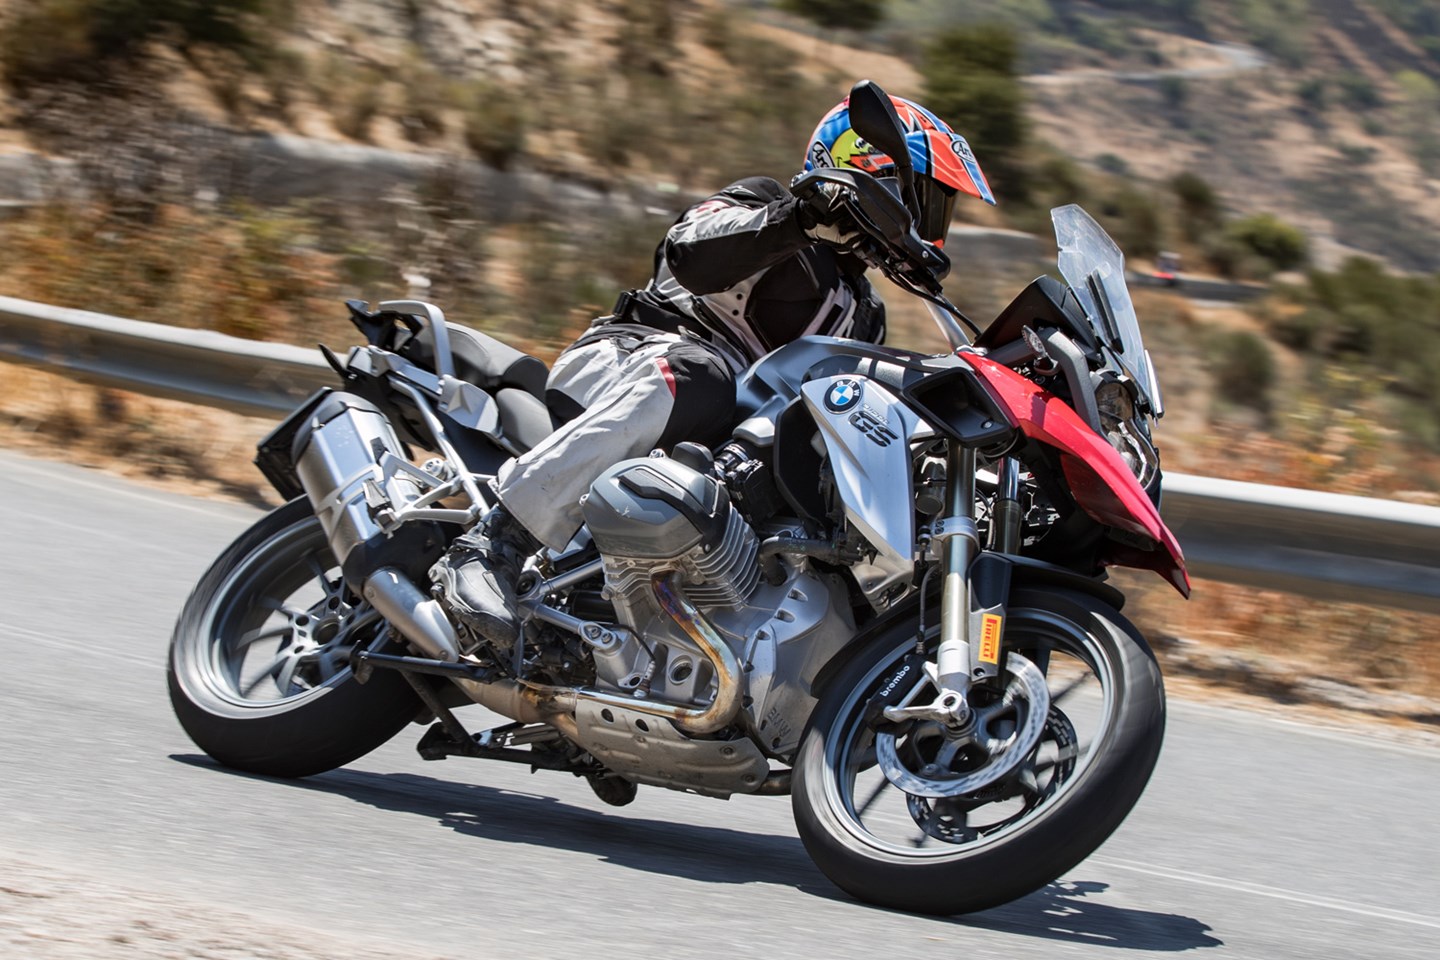 BMW R1200GS (2017-2018) Review